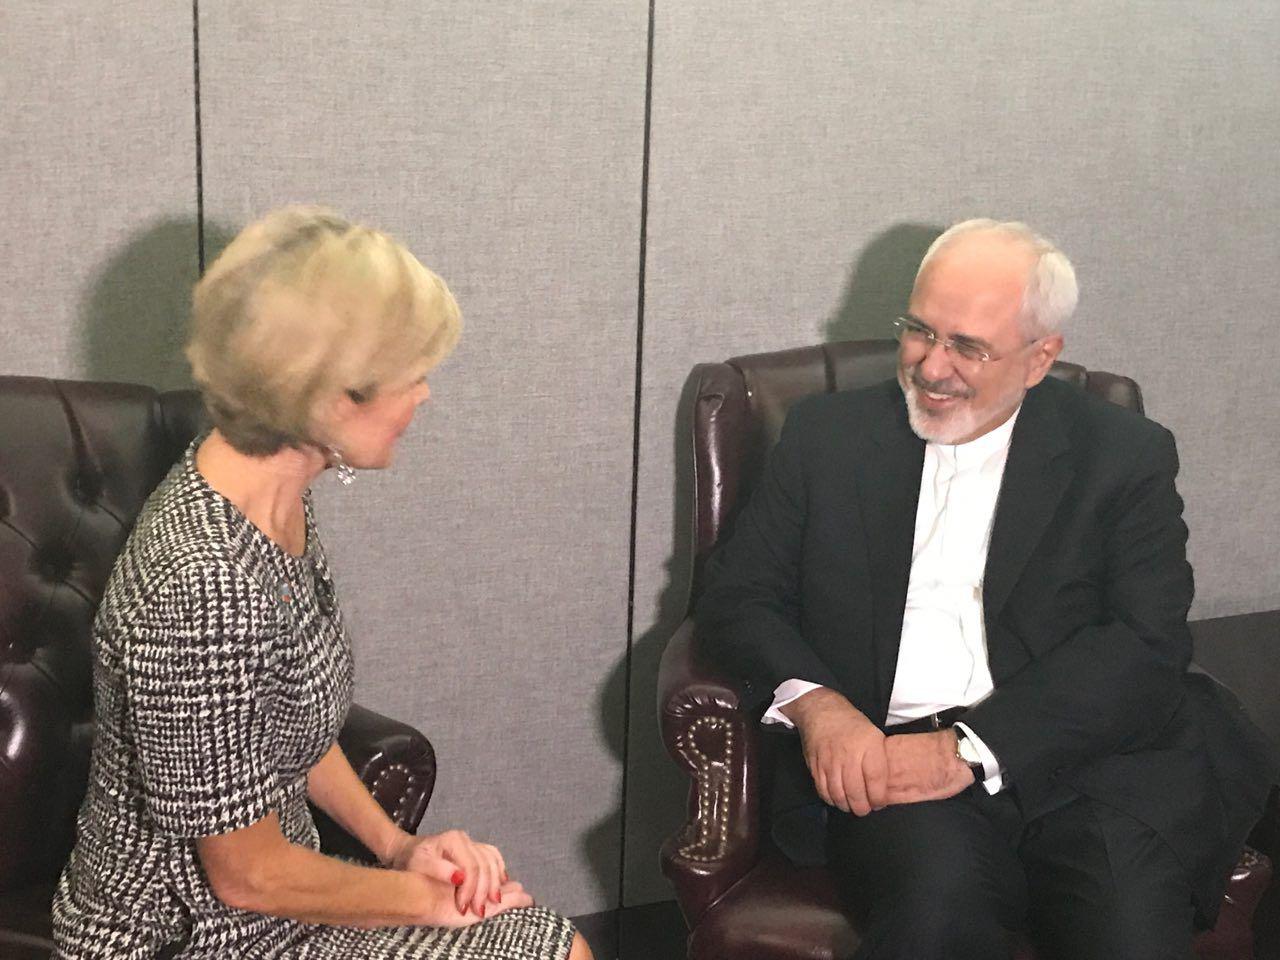 Iranian FM Holds High-Level Talks in New York